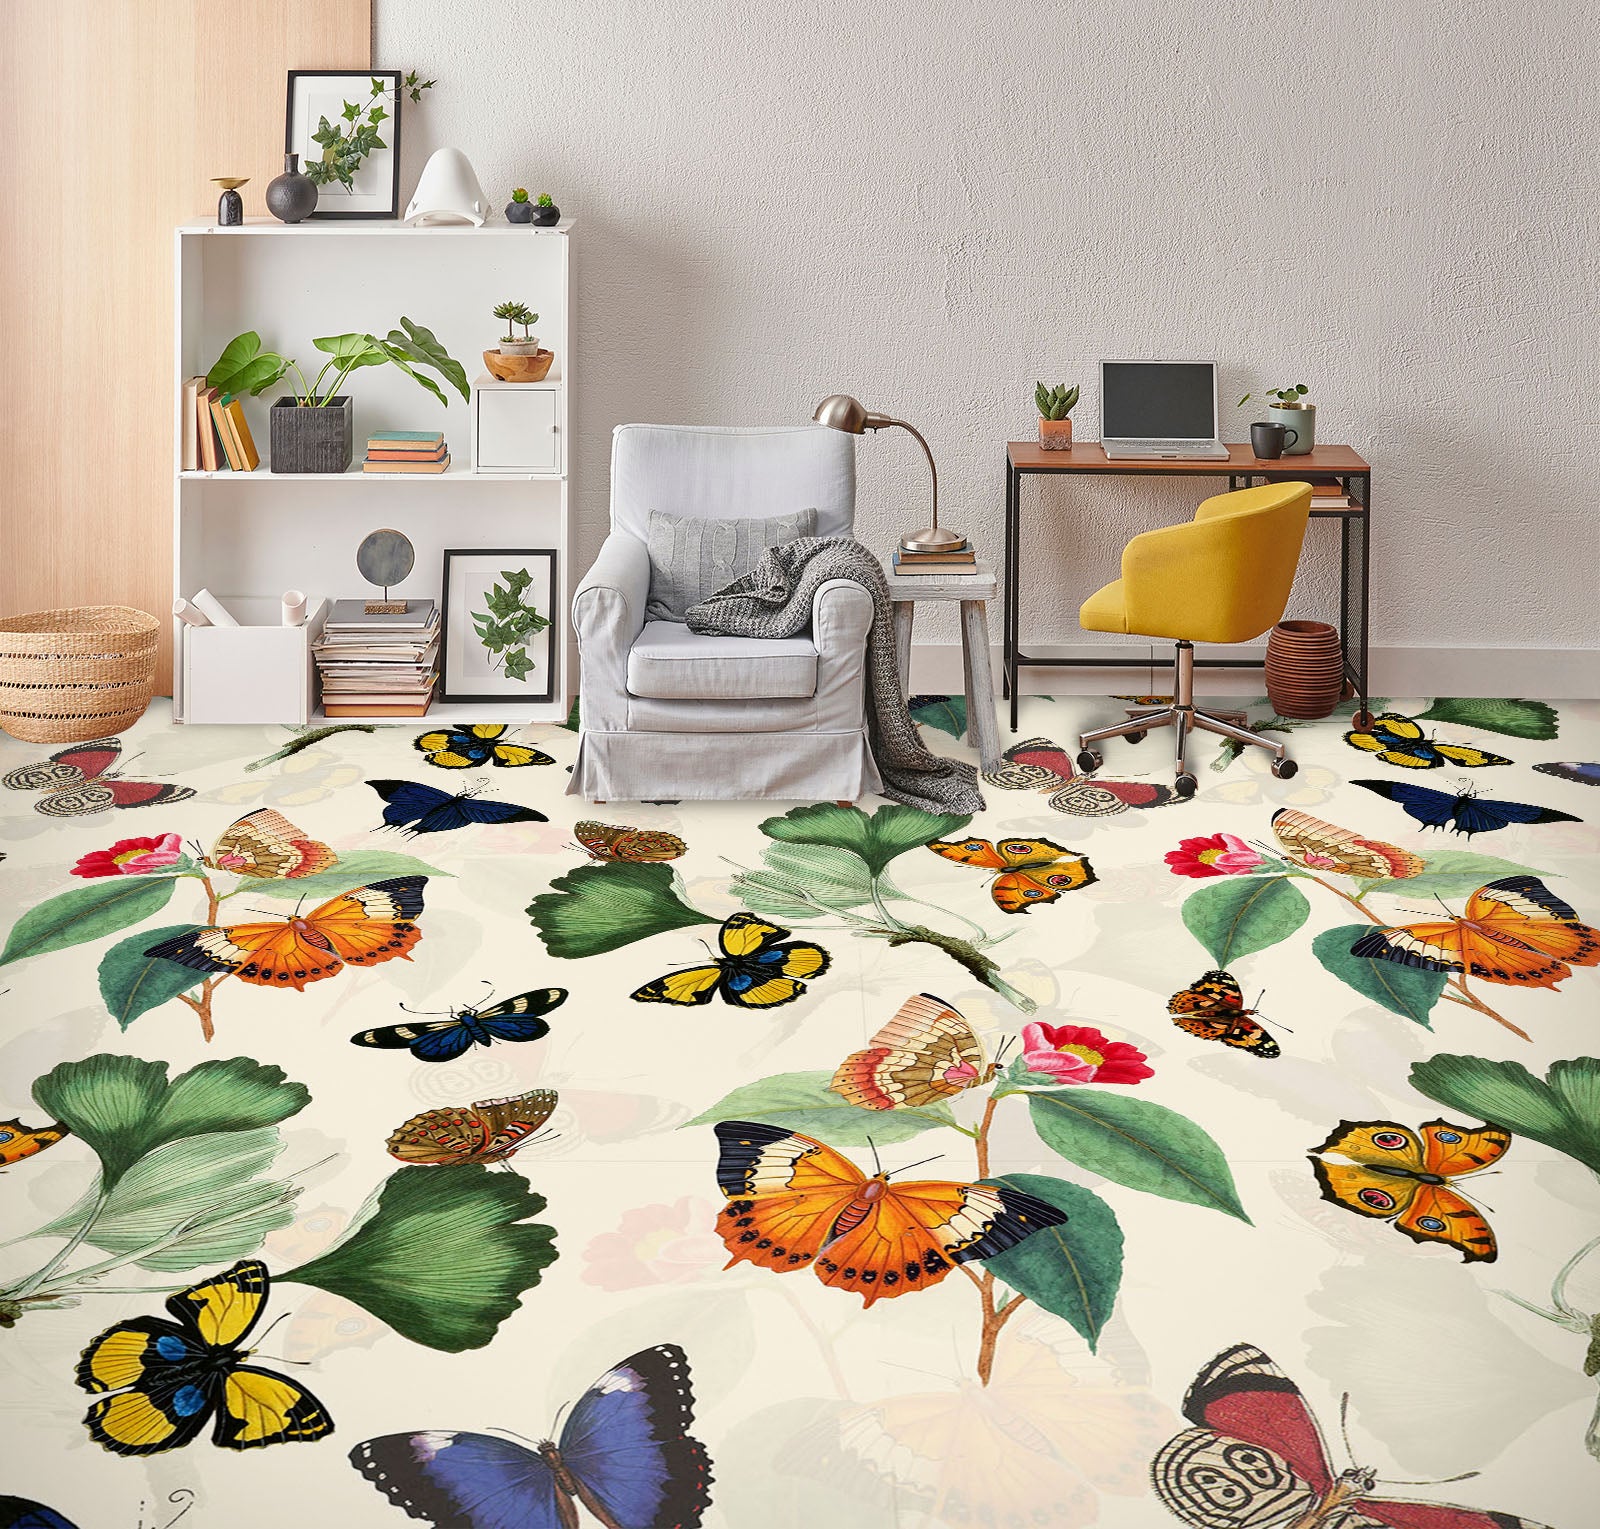 3D Colorful Butterfly Leaves 99218 Uta Naumann Floor Mural  Wallpaper Murals Self-Adhesive Removable Print Epoxy